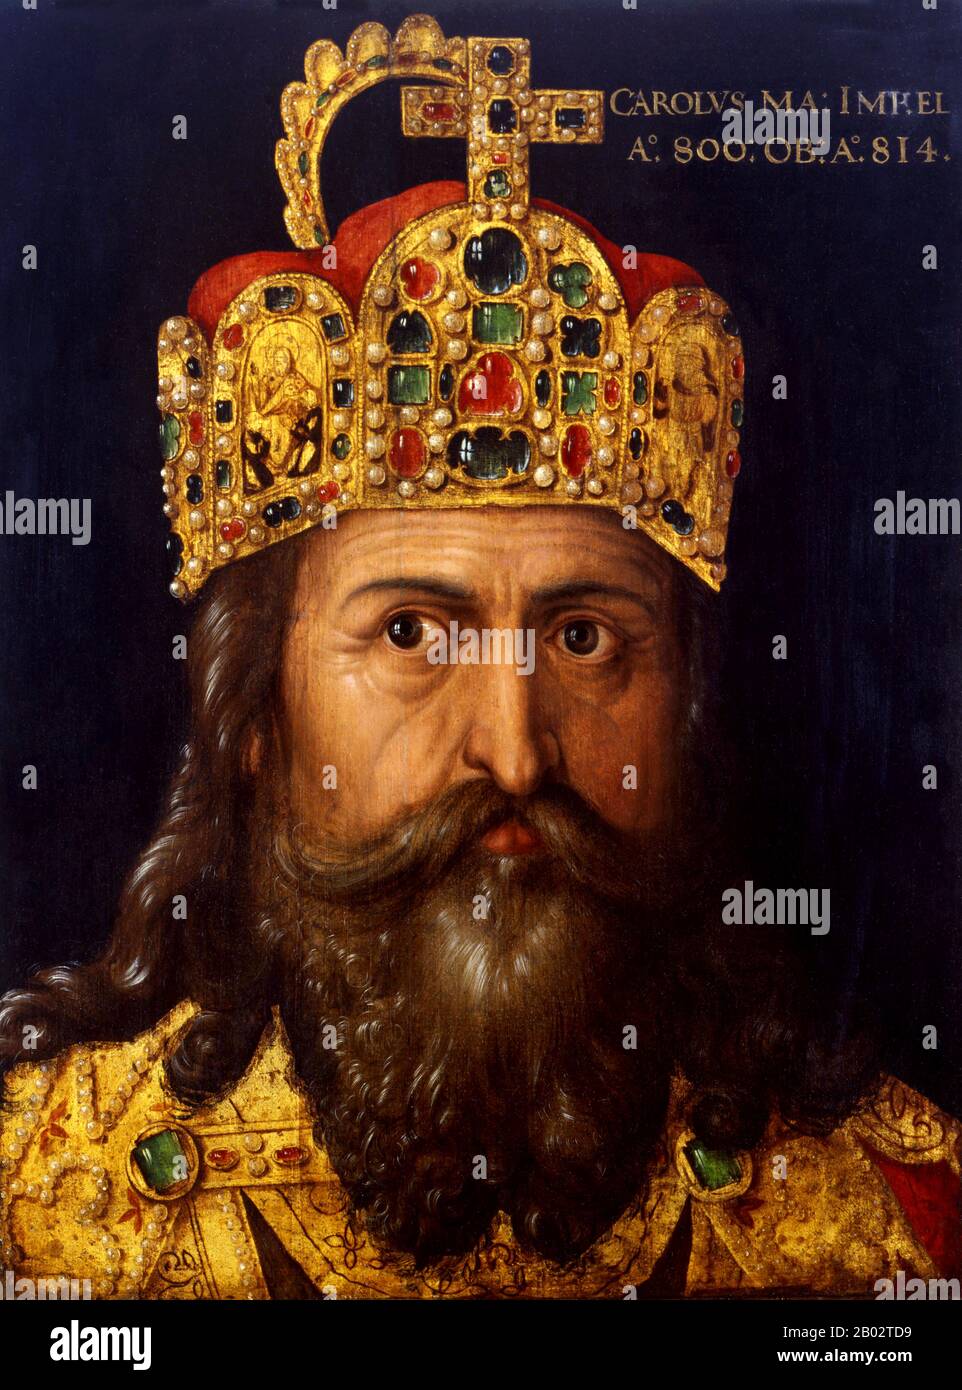 Charlemagne (2 April 742 – 28 January 814 CE), also known as Charles the  Great (Latin: Carolus or Karolus Magnus, French: Charles Le Grand or  Charlemagne, German: Karl der Grosse, Italian: Carlo